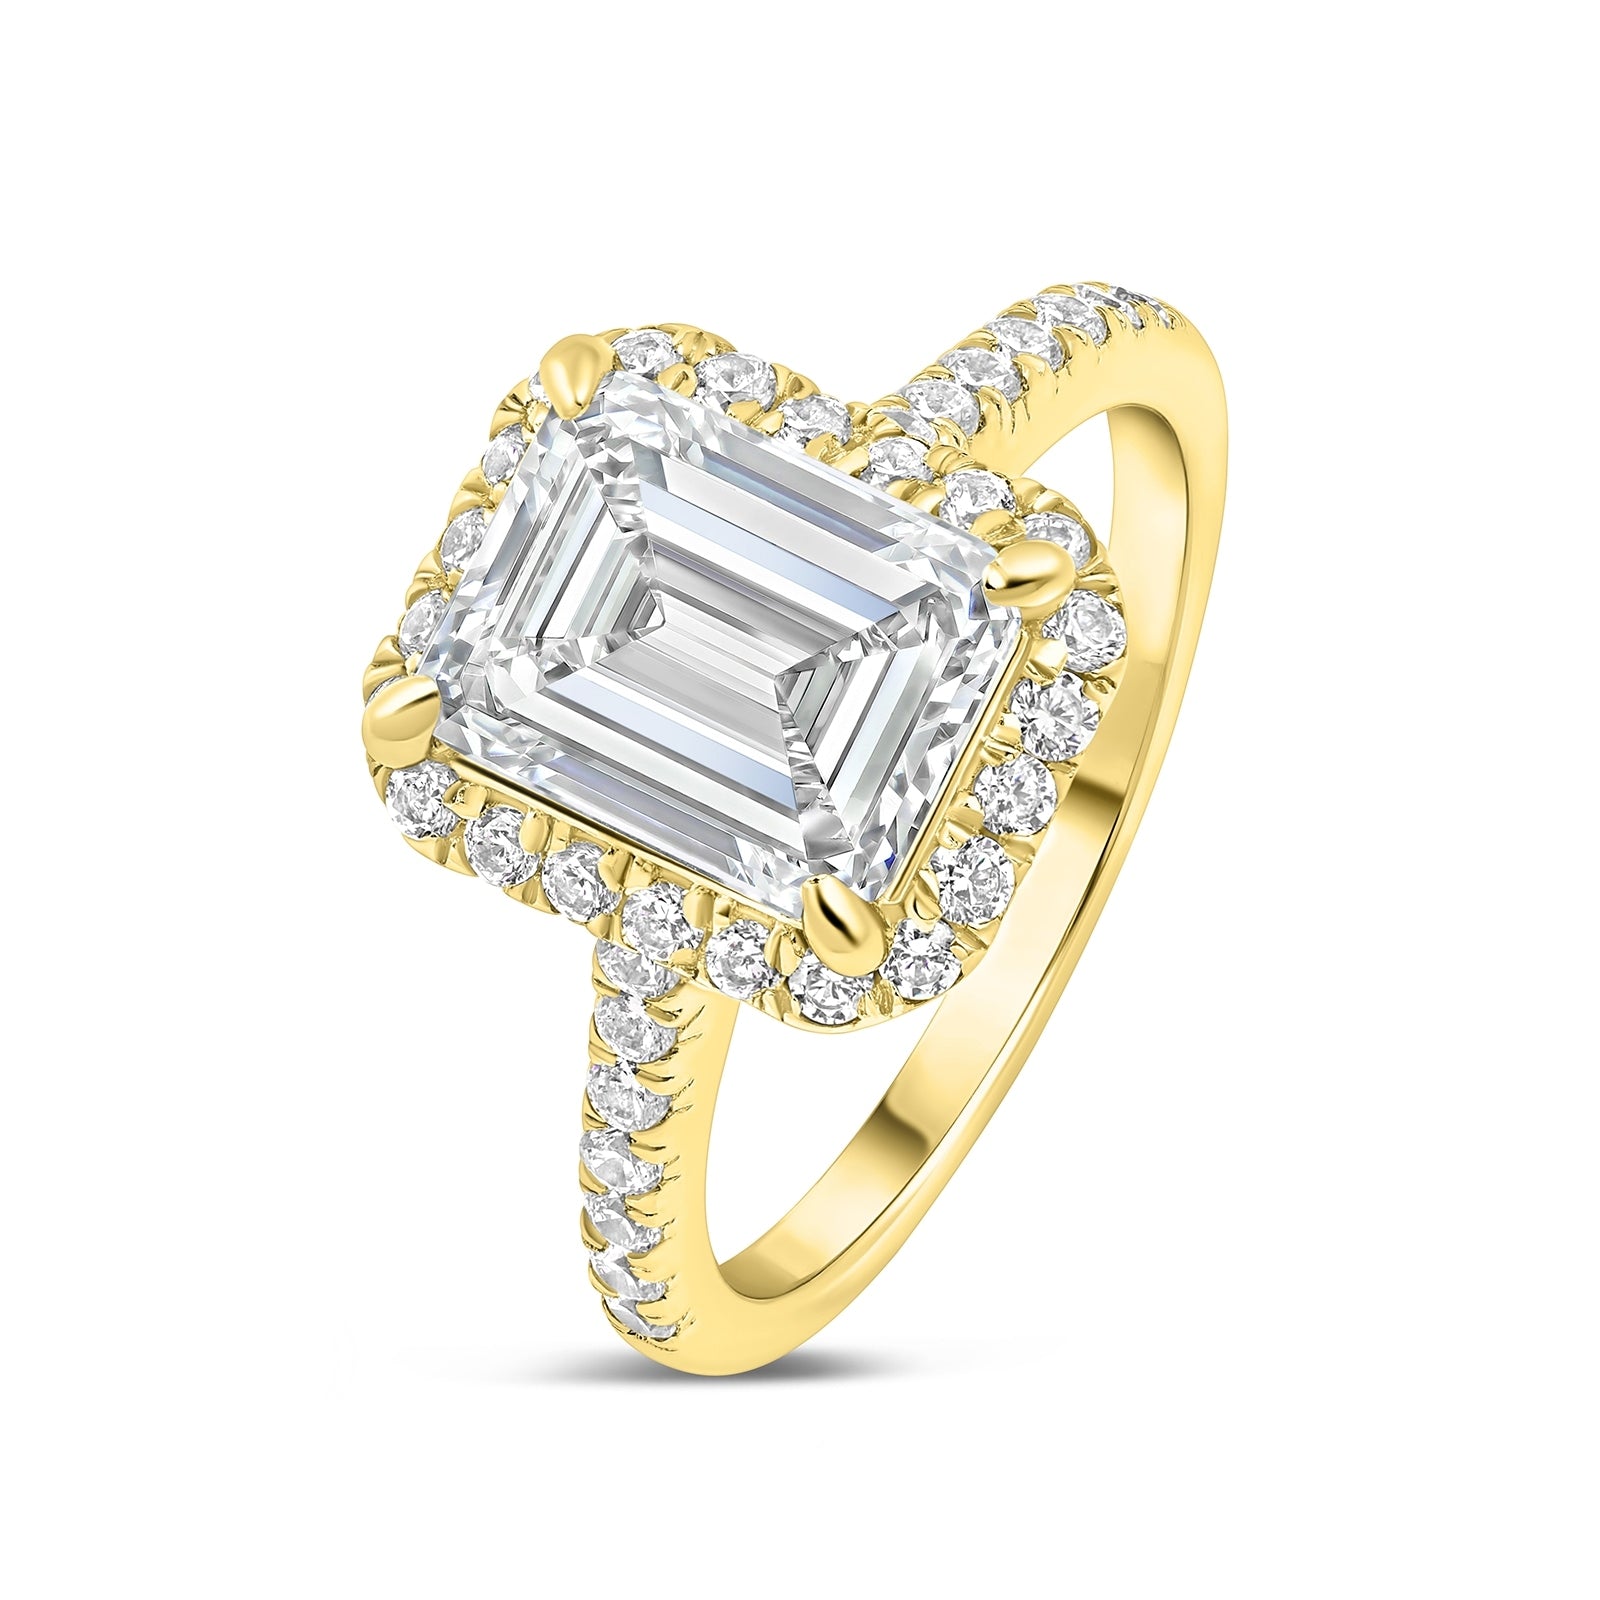 Classic 3 carat emerald cut engagement ring with half eternity band detailing tilted to its side